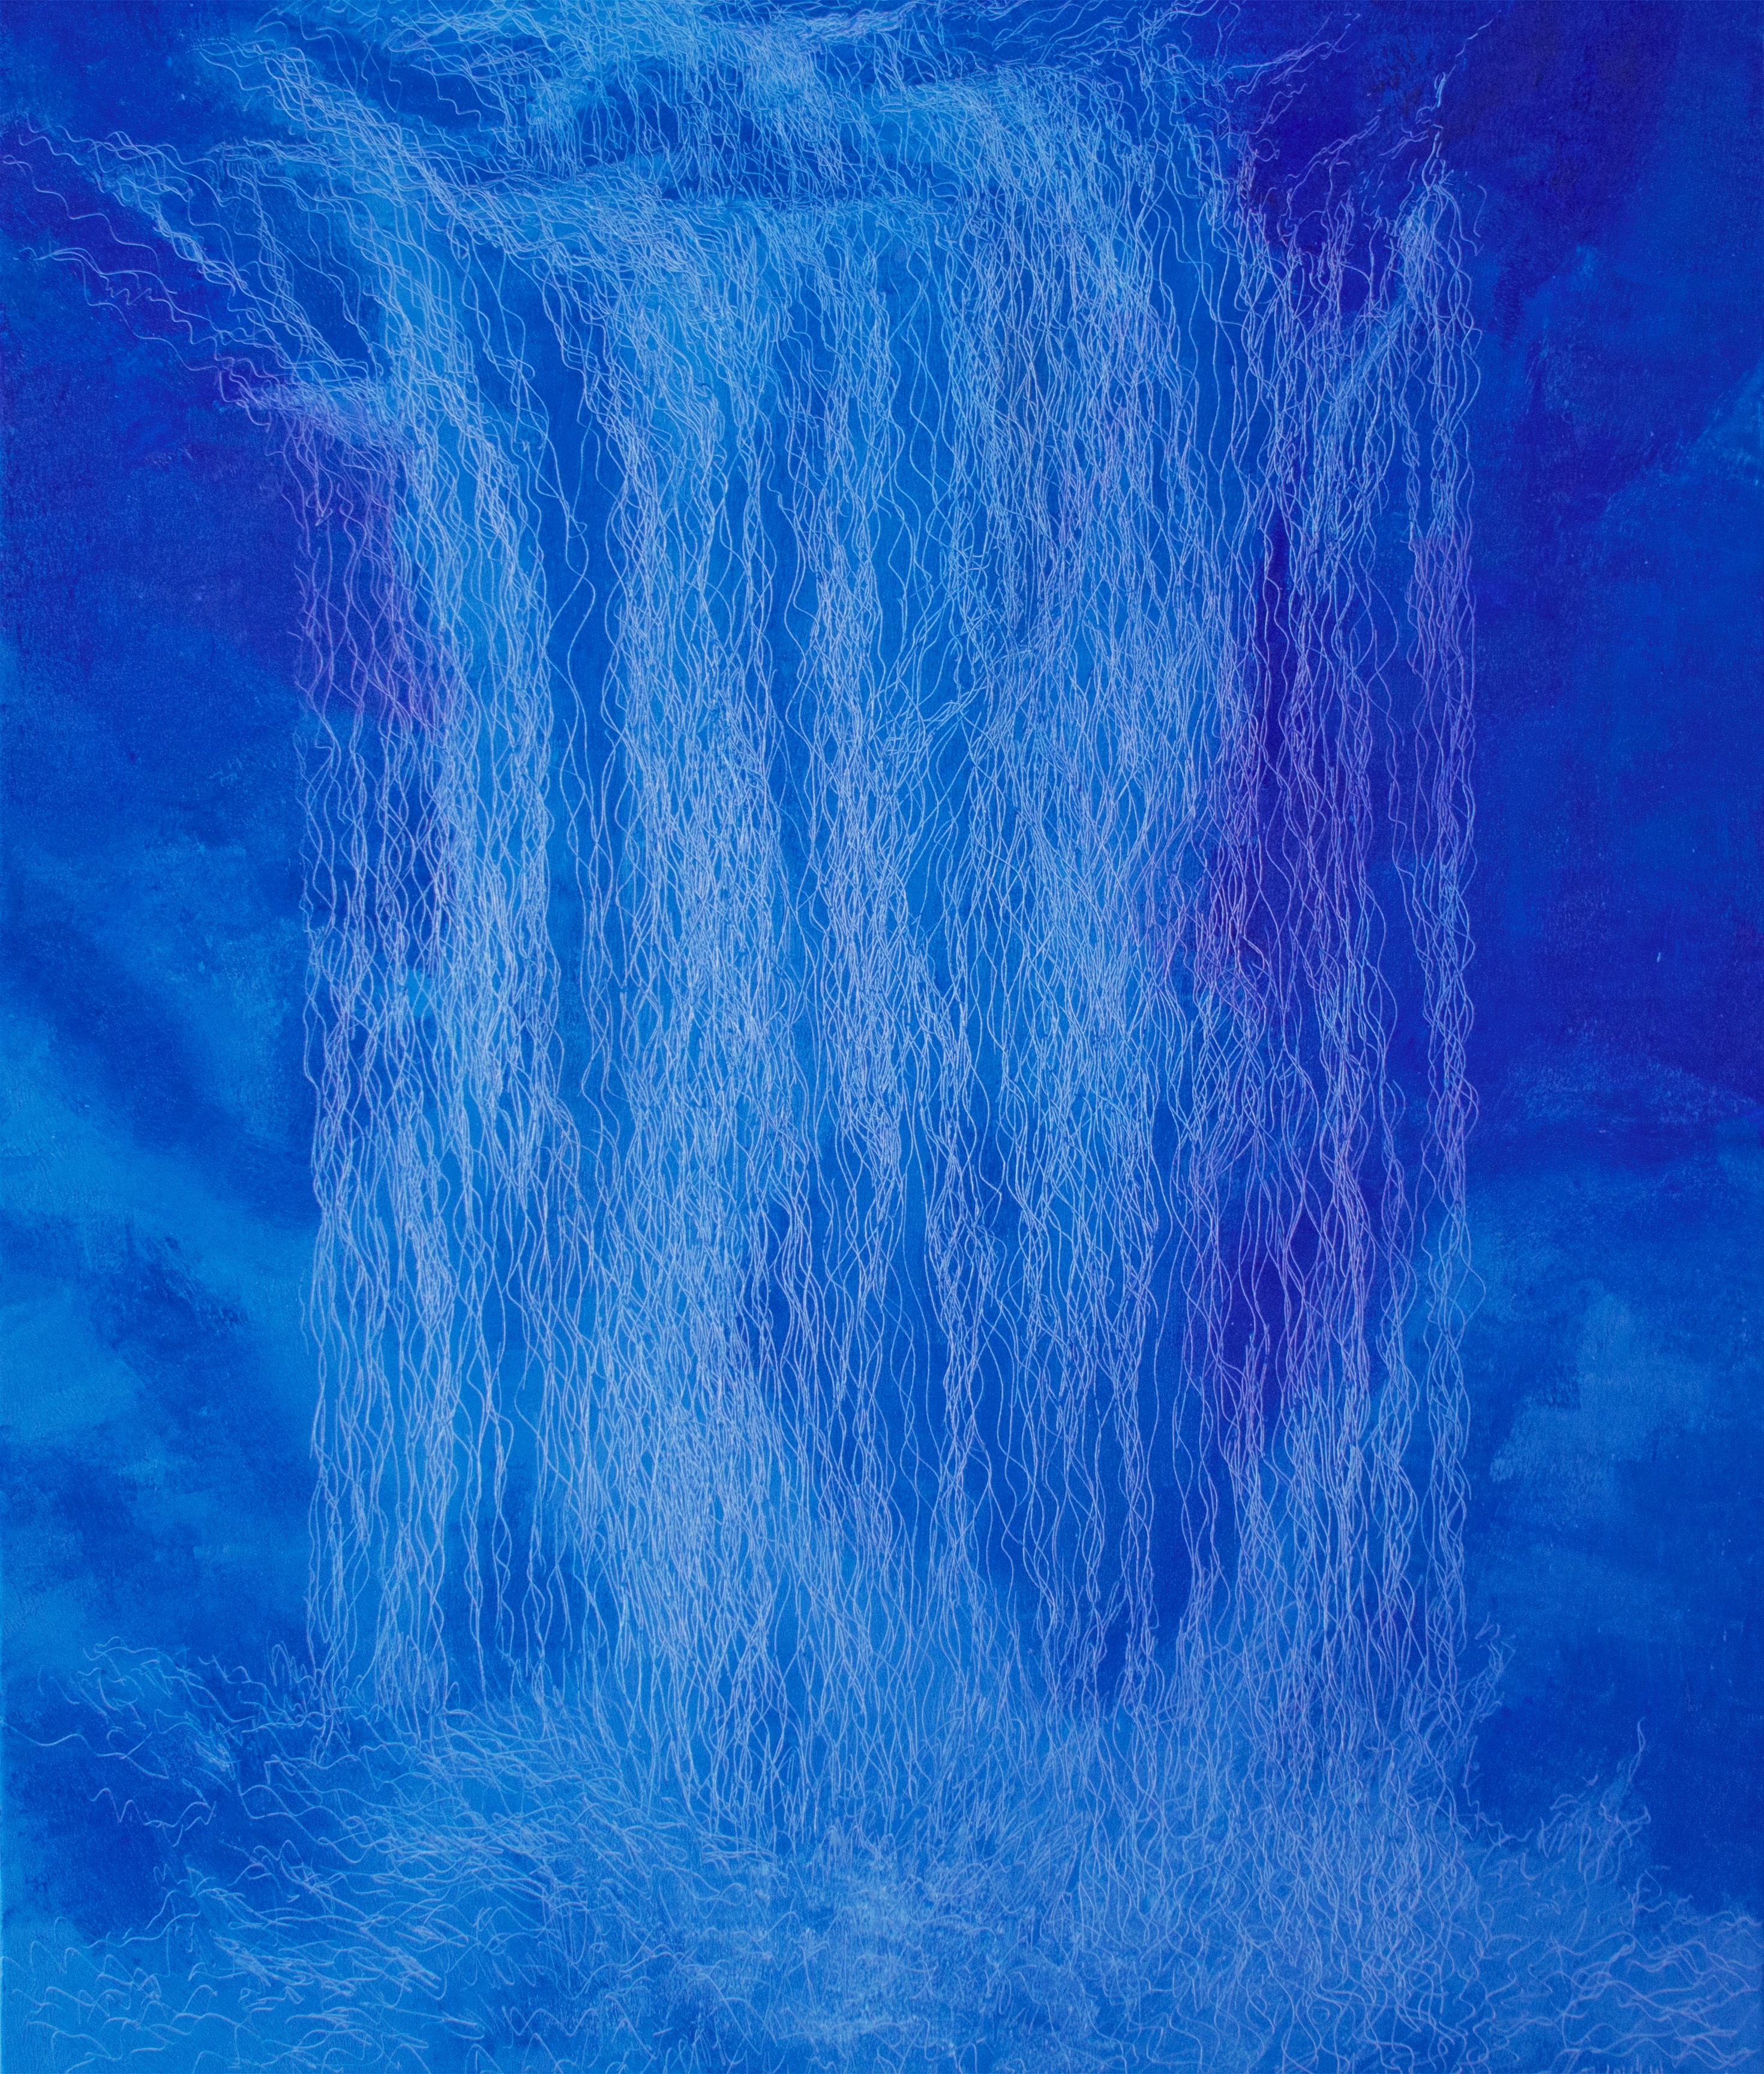 Leigh Wen Landscape Painting - Waterfall VI